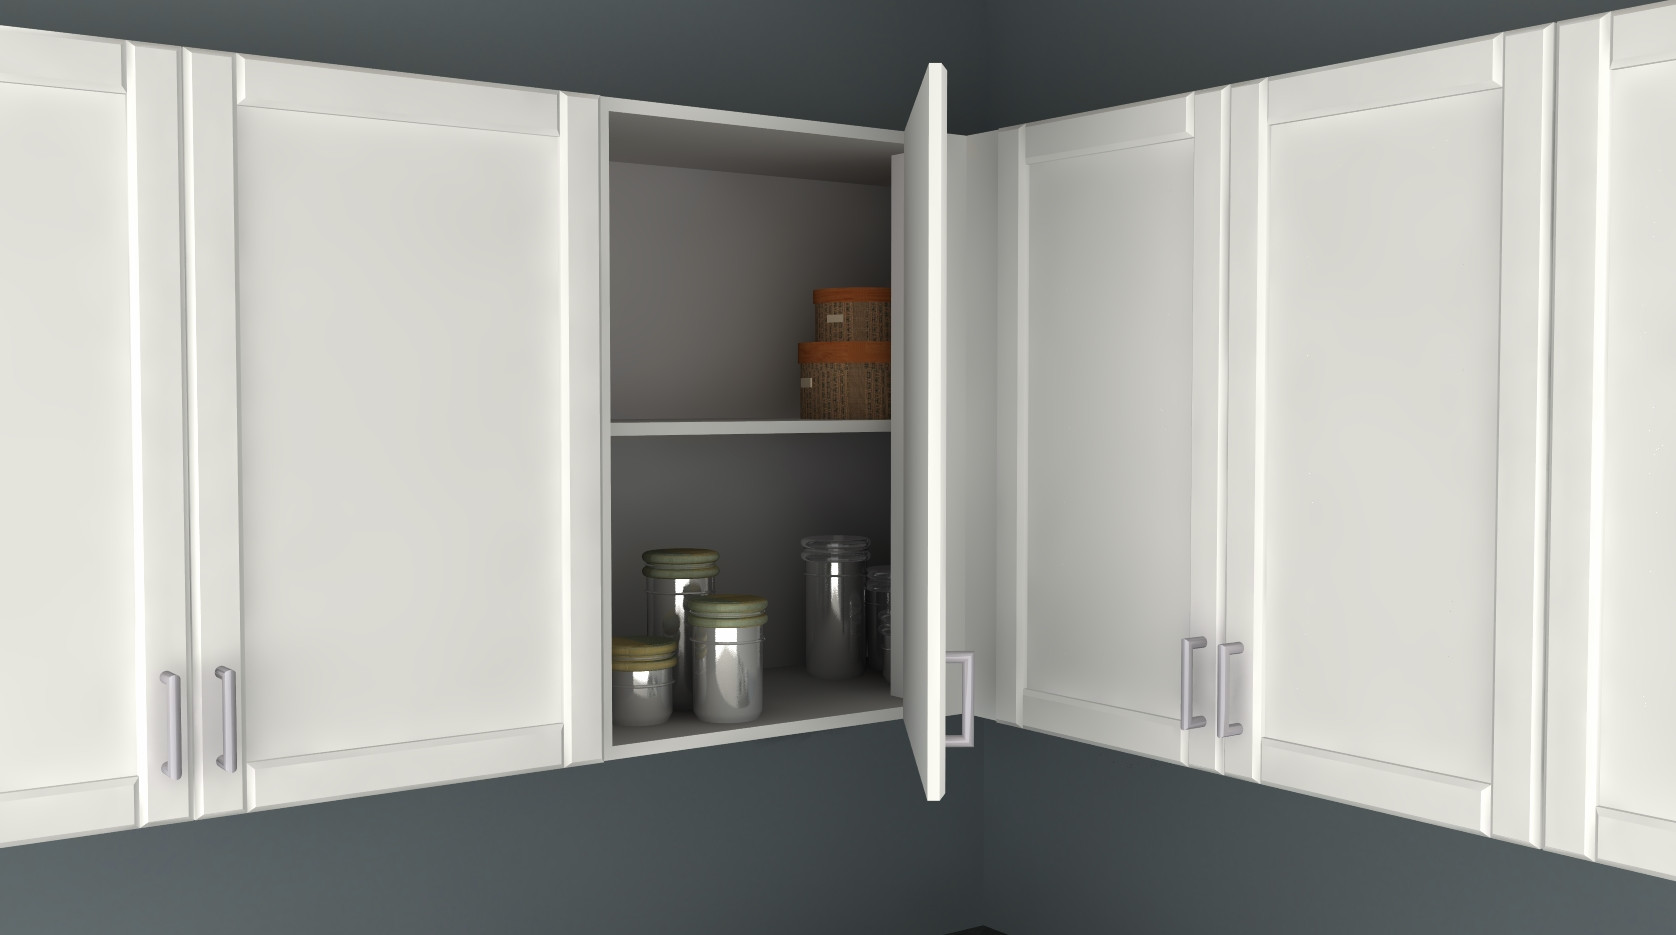 Wall Cabinet Kitchen
 IKEA Kitchen Hack A Blind Corner Wall Cabinet Perfect for